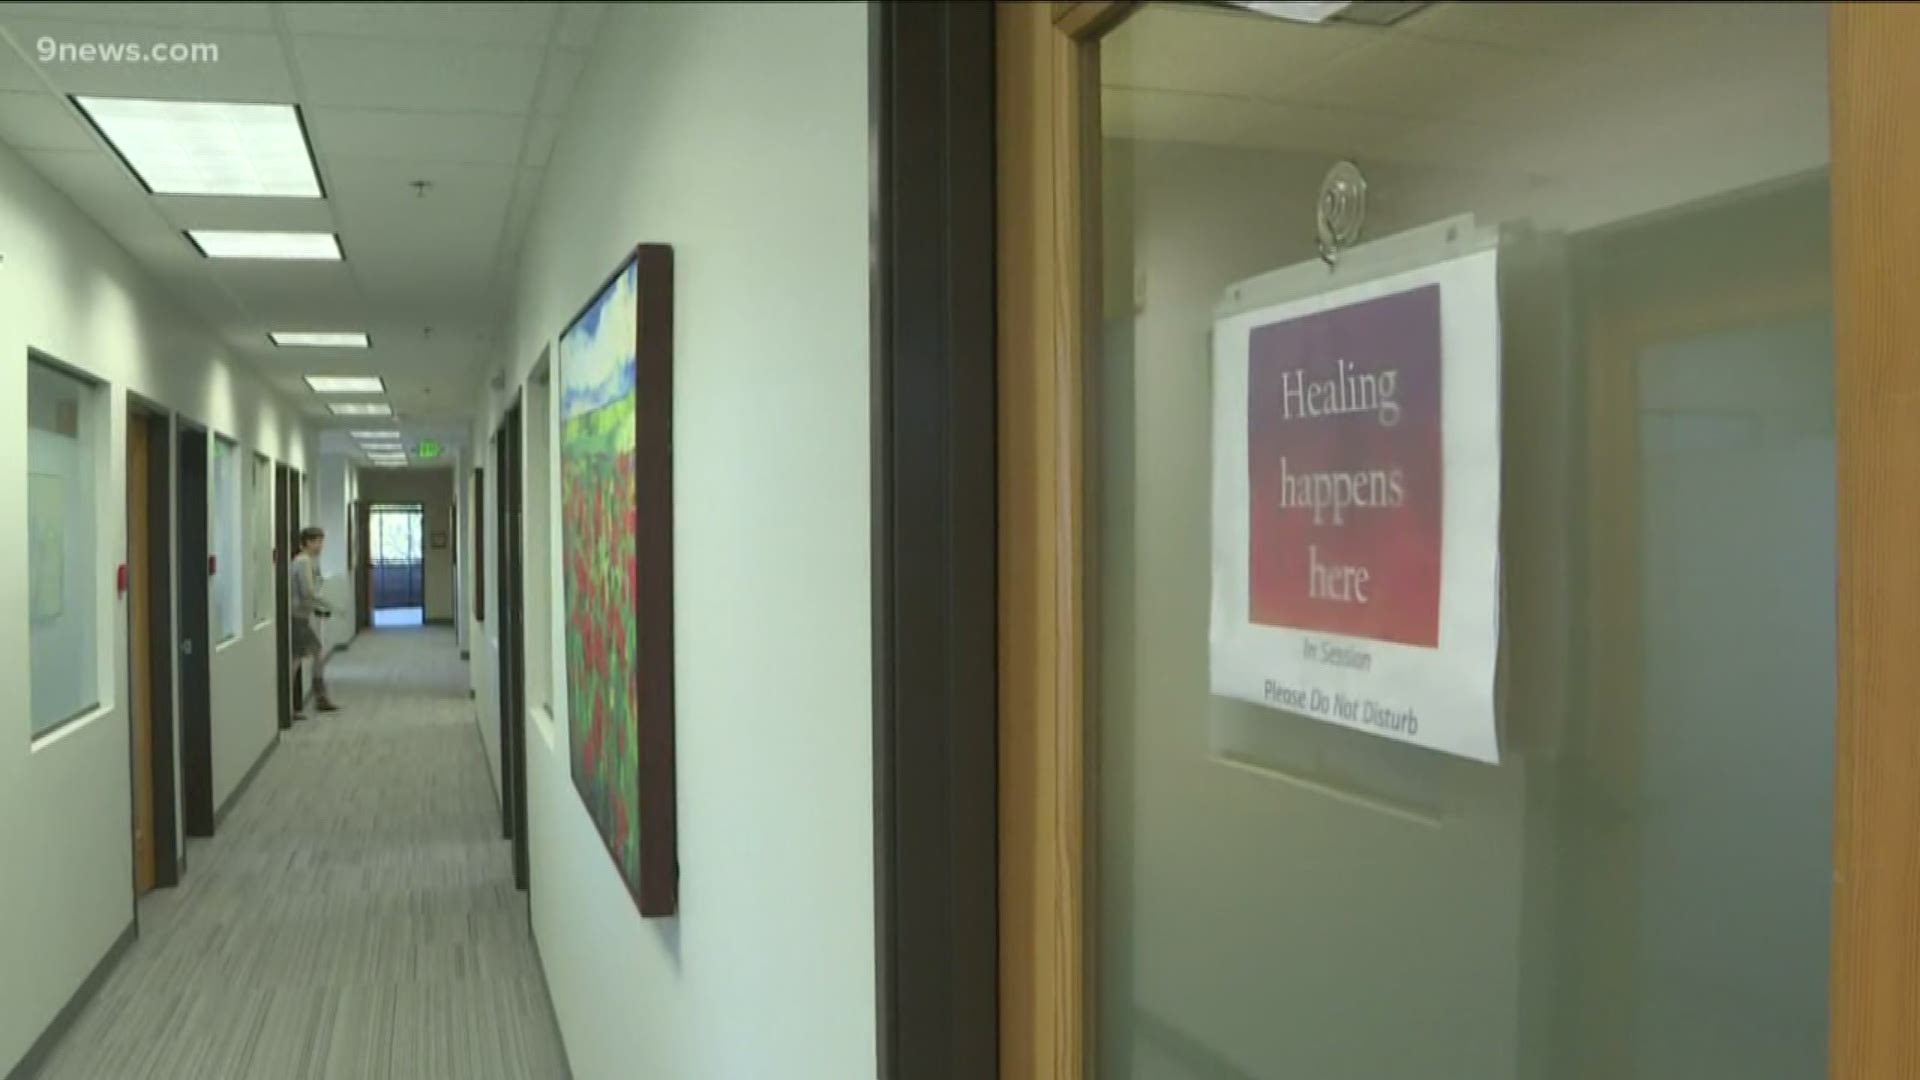 Research shows 70% of the general population has experienced at least one traumatic event. A mental health clinic in Lafayette is helping people move beyond trauma.